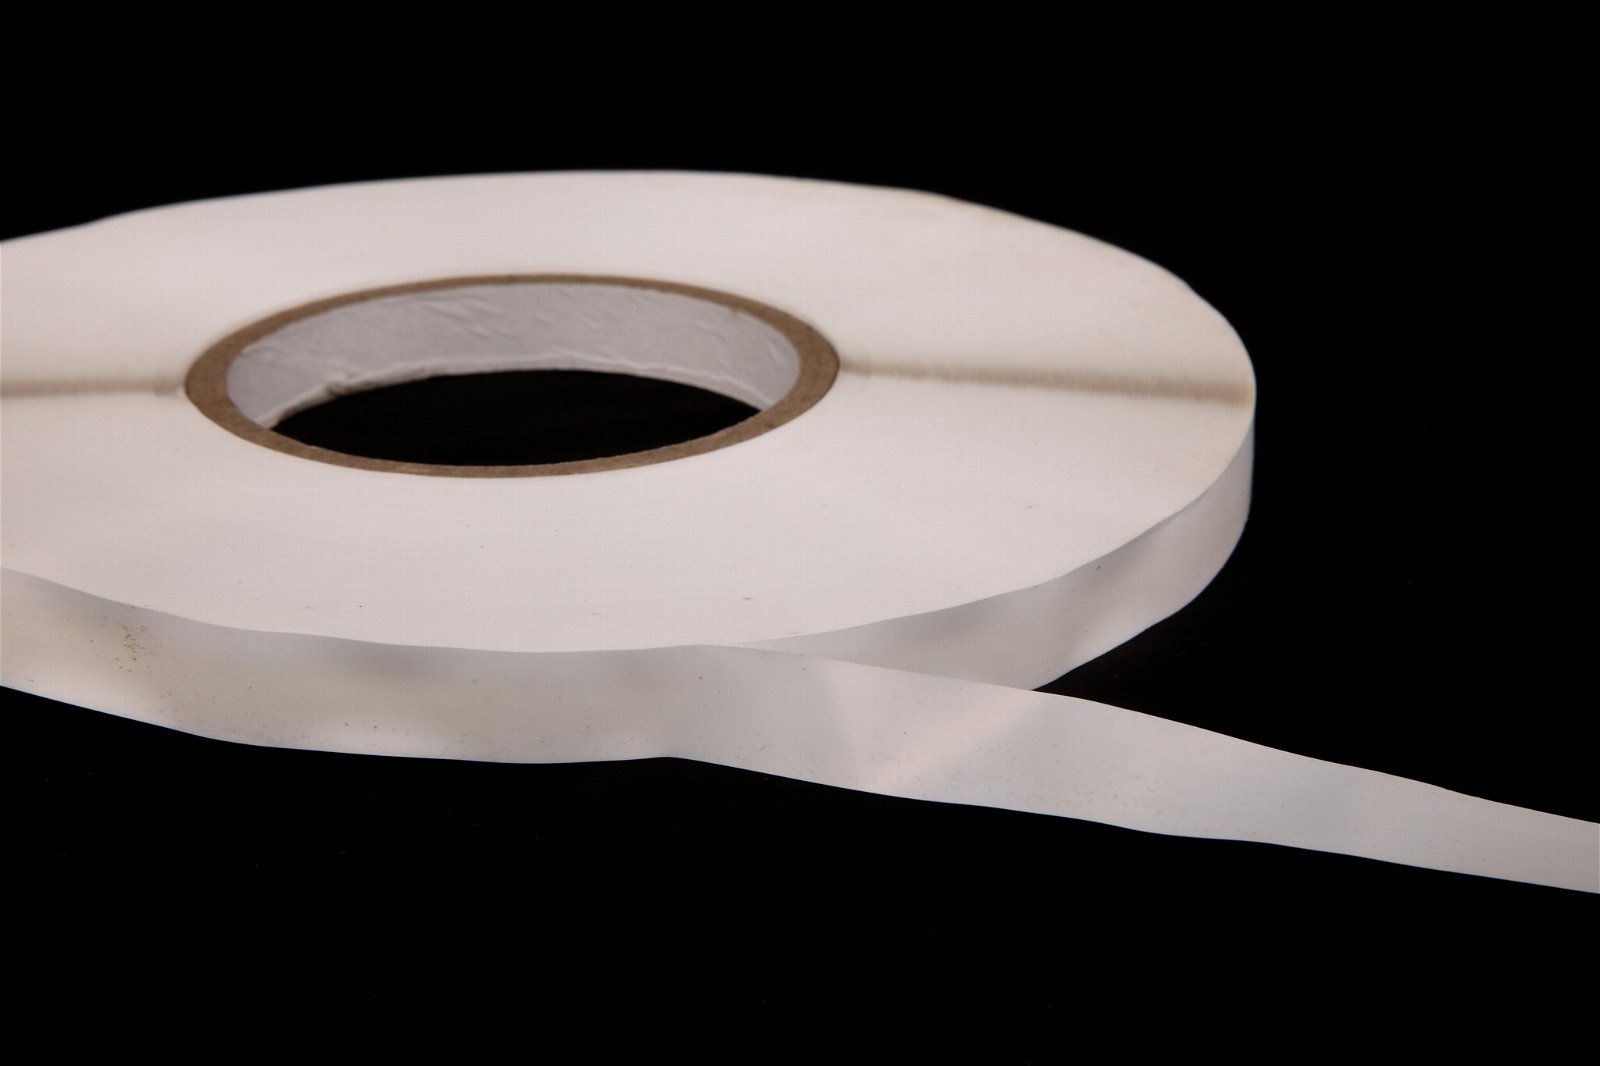 18mm Best Sell Double Sidede Express Bag Damaging Adhesive Polybag Sealing Tape